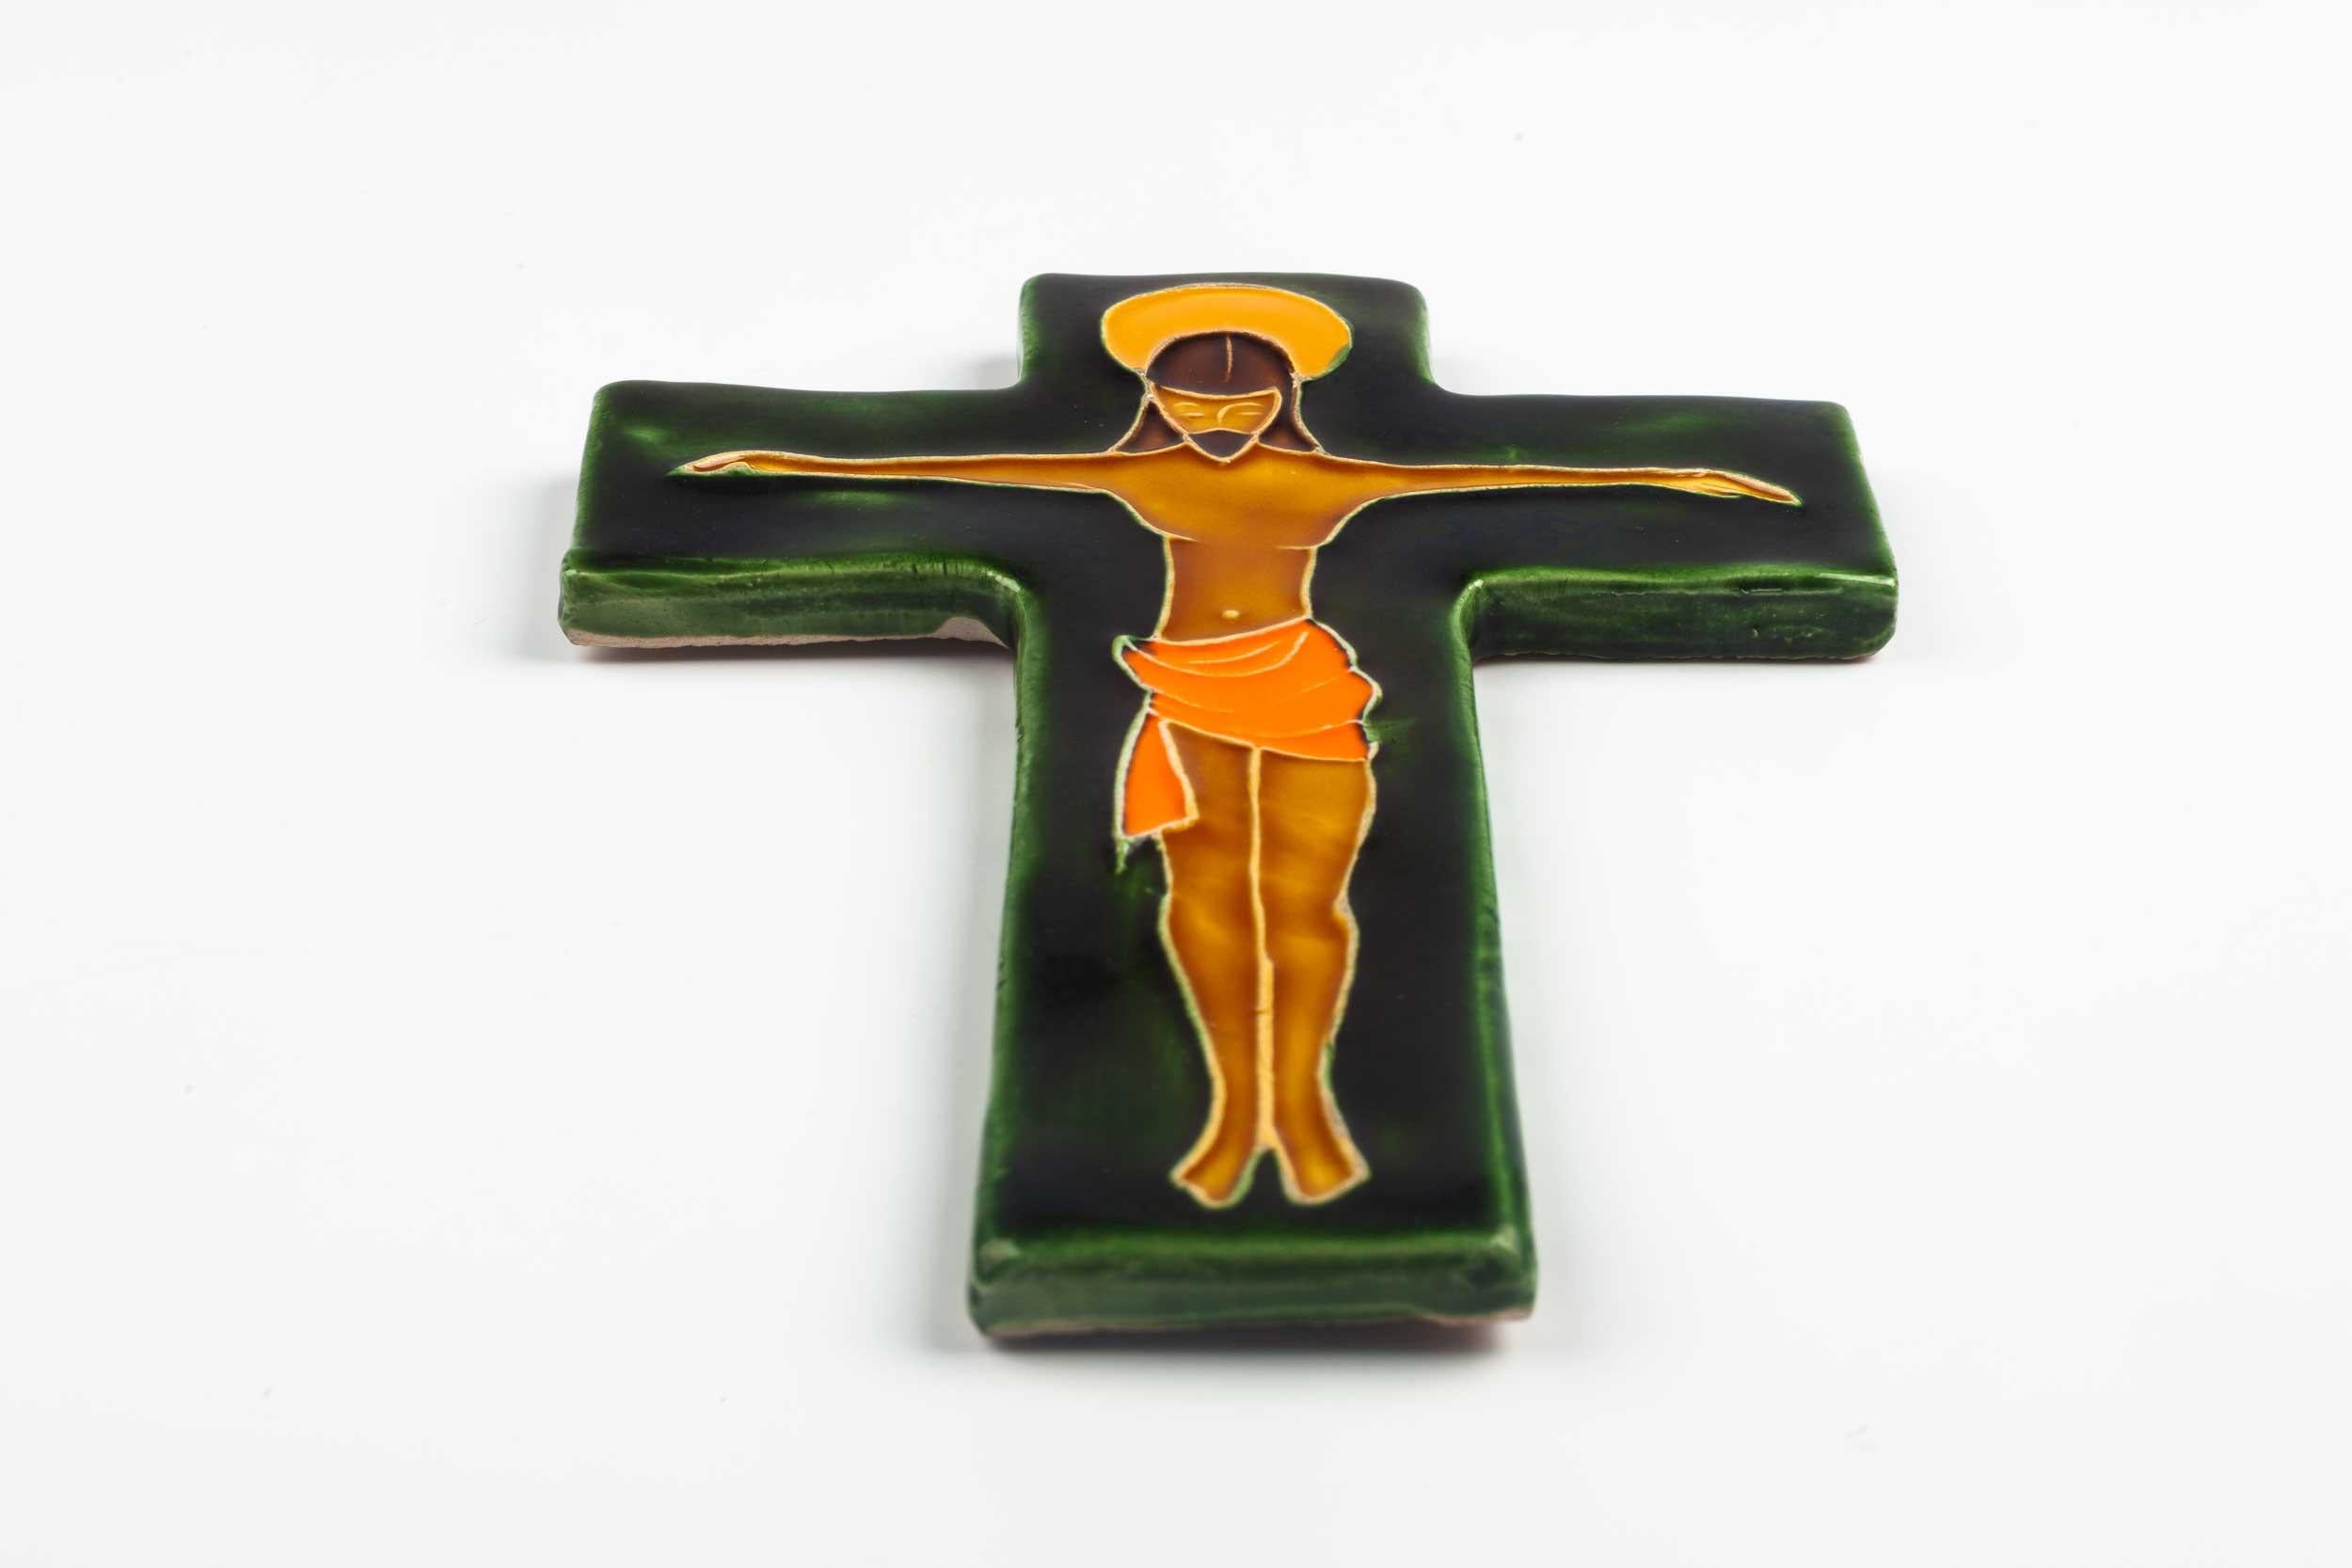 Midcentury European wall crucifix in glazed ceramic depicting stylistic Christ on green cross. From a large collection of vintage crosses handmade by Flemish artisans. 

From modernism to brutalism, the crosses in our collection range from being